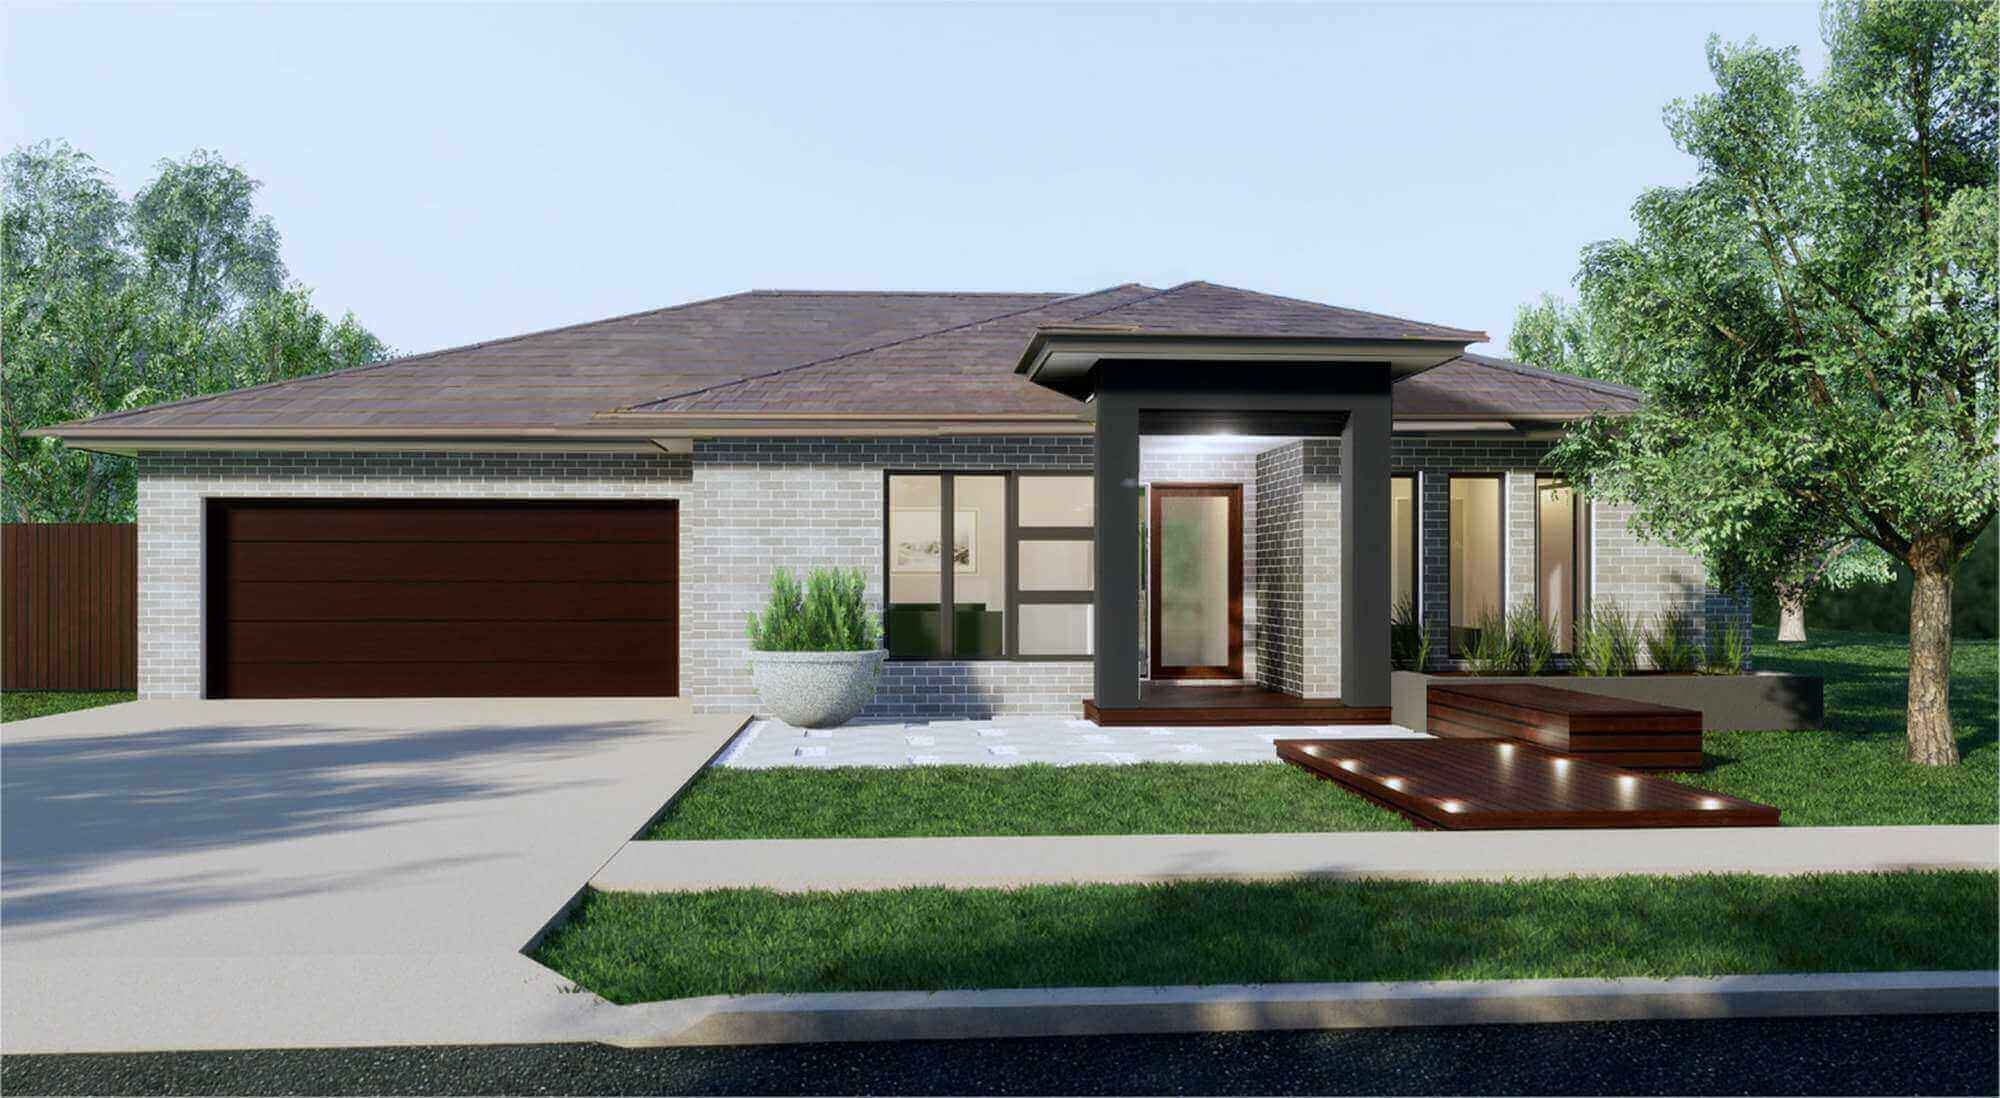 A Rendering Of A Modern House With A Garage